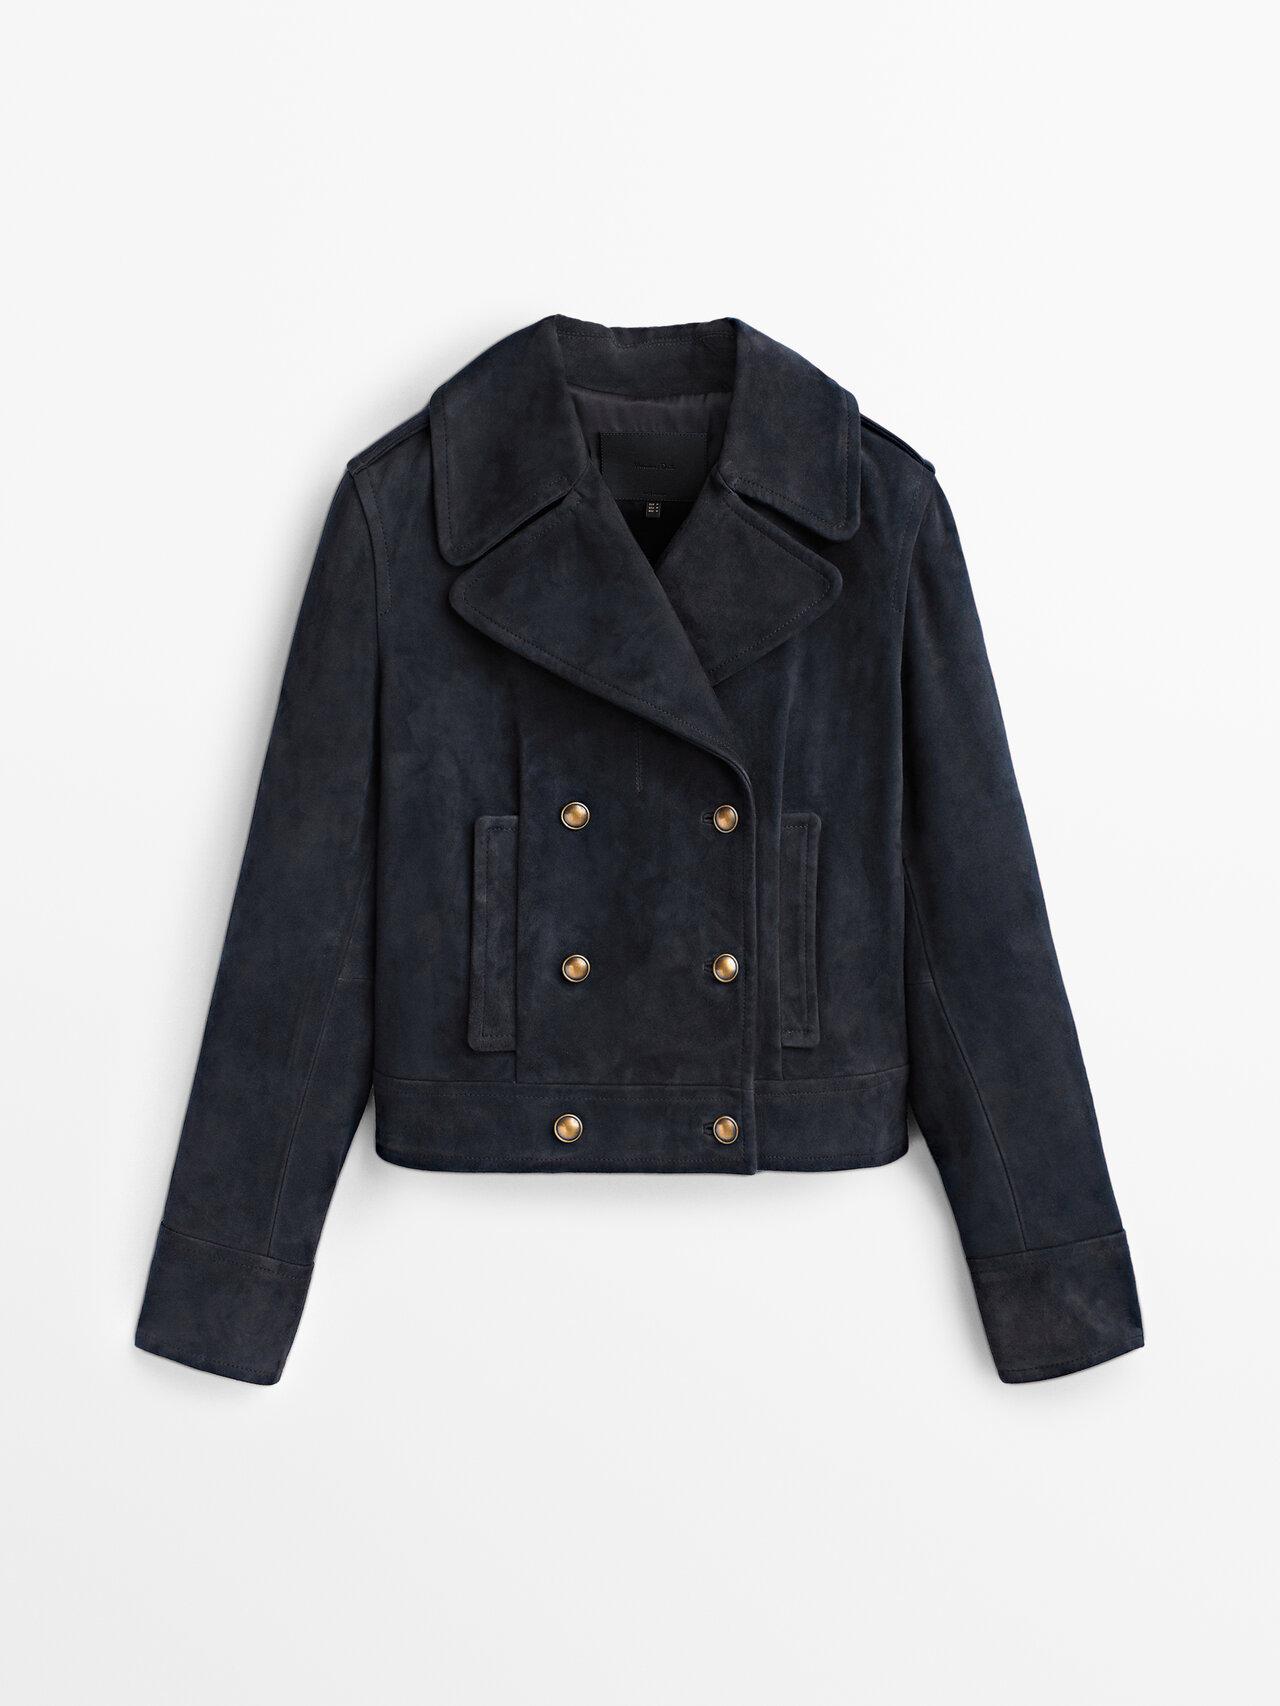 MASSIMO DUTTI Double-breasted Suede Leather Jacket With Buttons in Blue |  Lyst